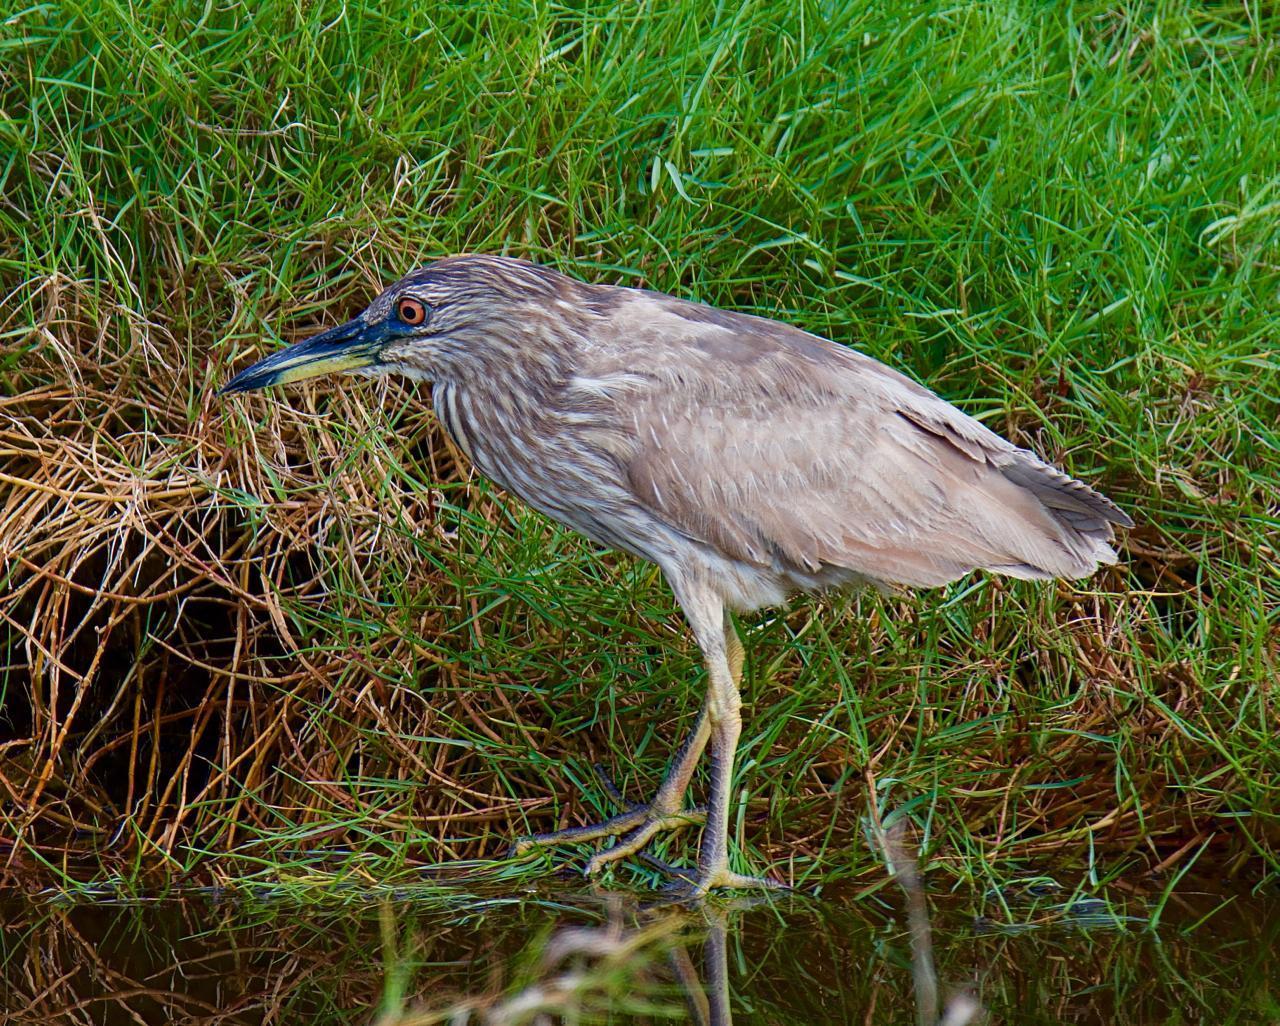 Black-crowned Night-Heron (American) Photo by Brian Avent